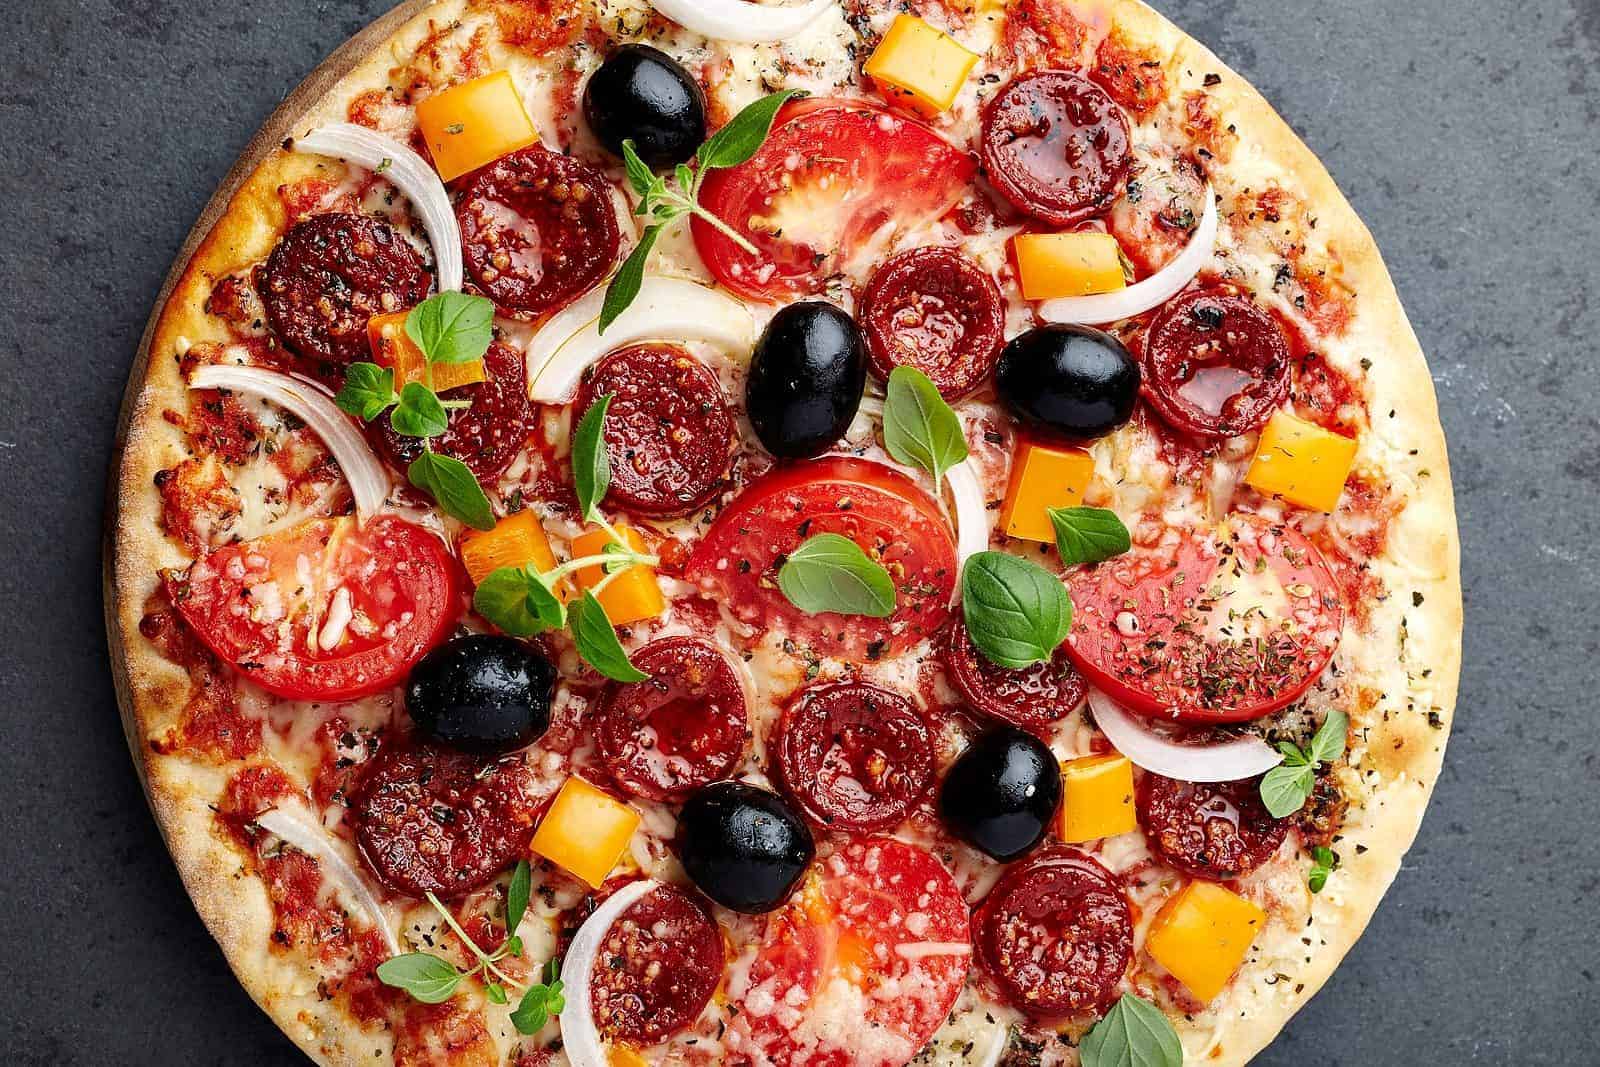 Best Pizza Stones 2017 – Reviews & Buyer’s Guide (May. 2020) Can You Cut Pizza On A Pizza Stone